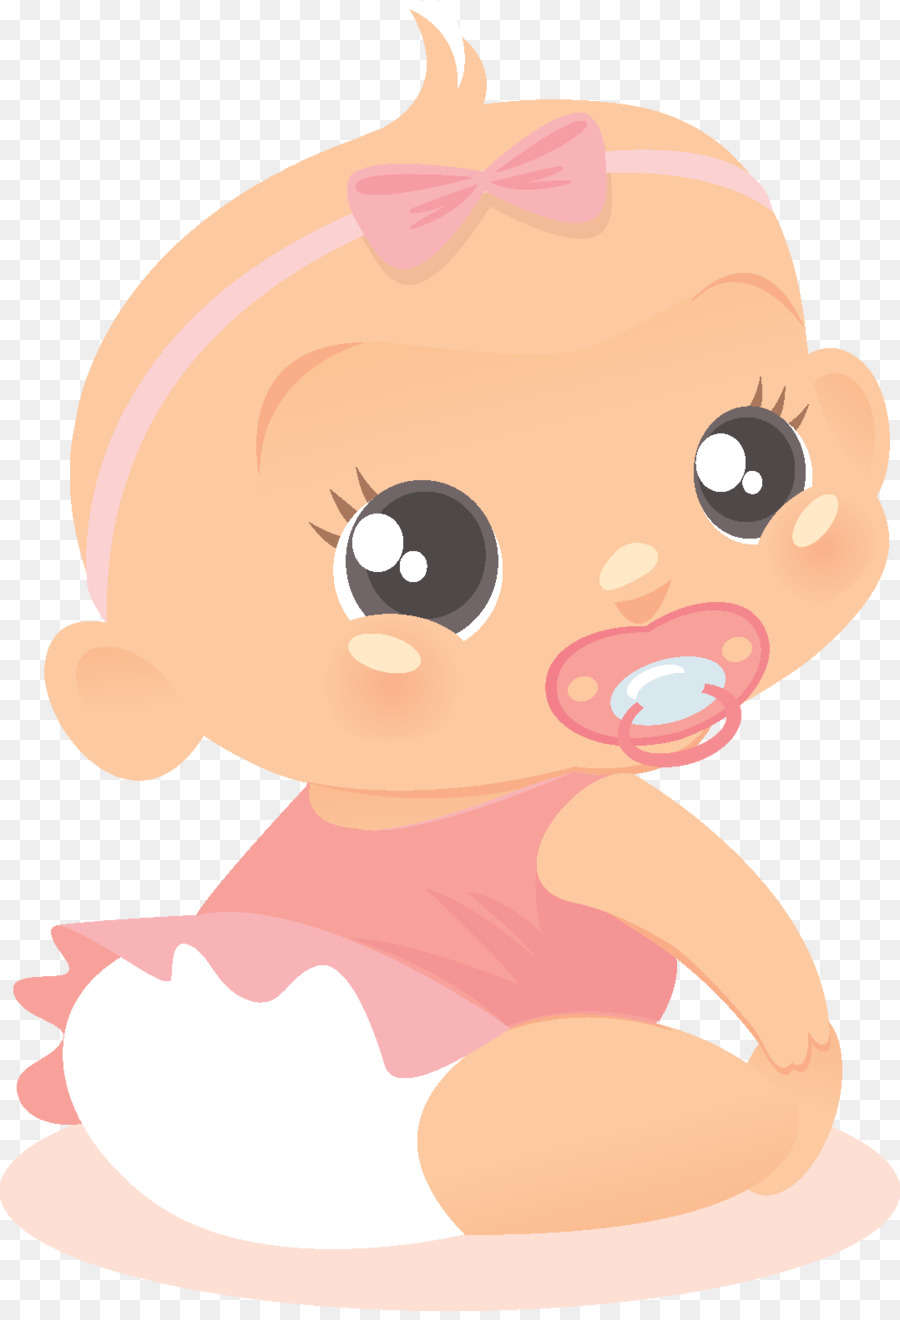 Download Diaper Vector at Vectorified.com | Collection of Diaper Vector free for personal use